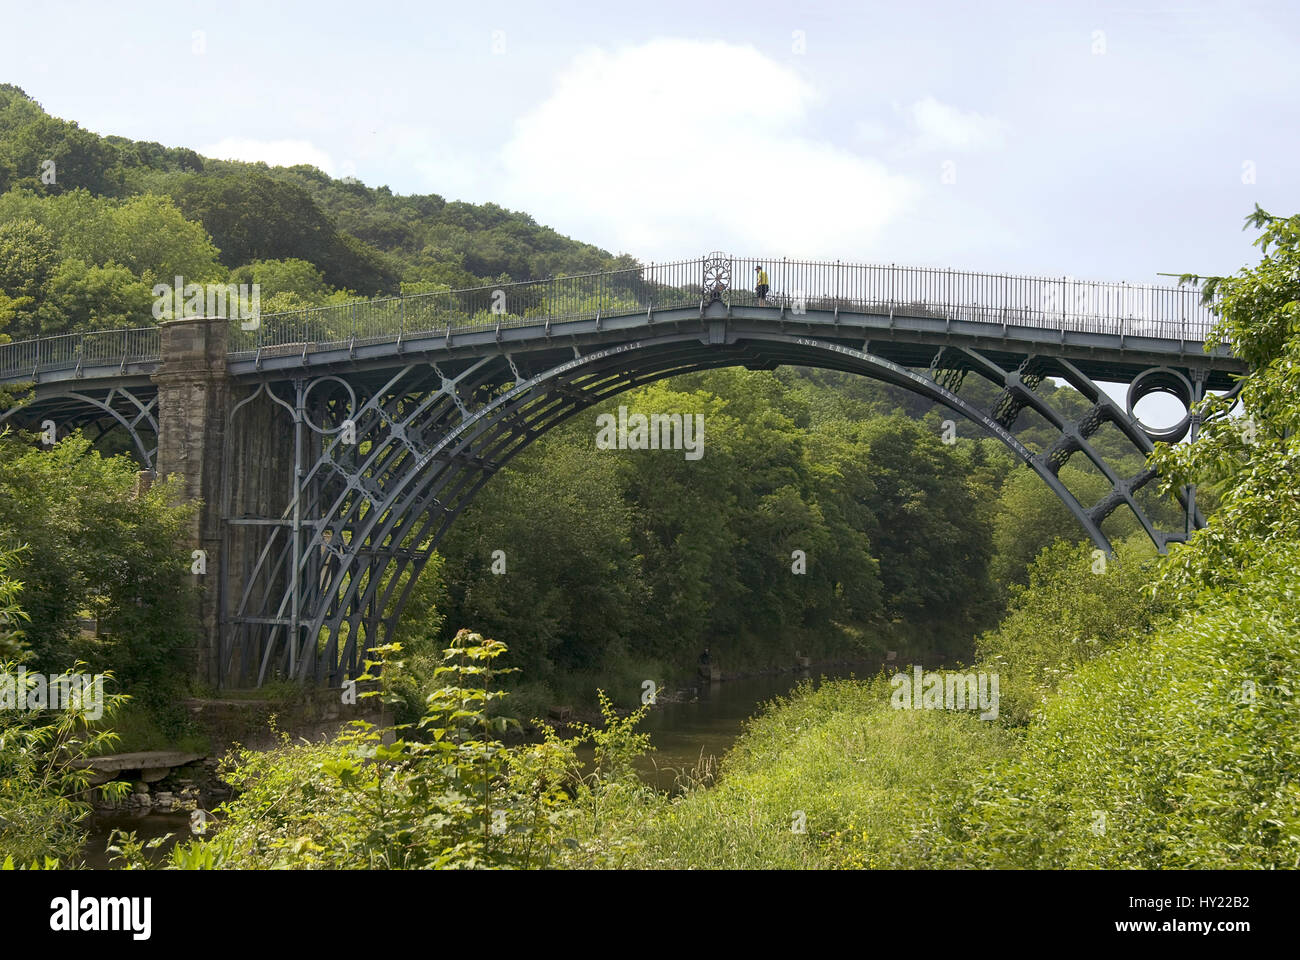 The Iron Bridge crosses the River Severn at the Ironbridge Gorge, by the village of Ironbridge, in Shropshire, England. It was the first arch bridge i Stock Photo